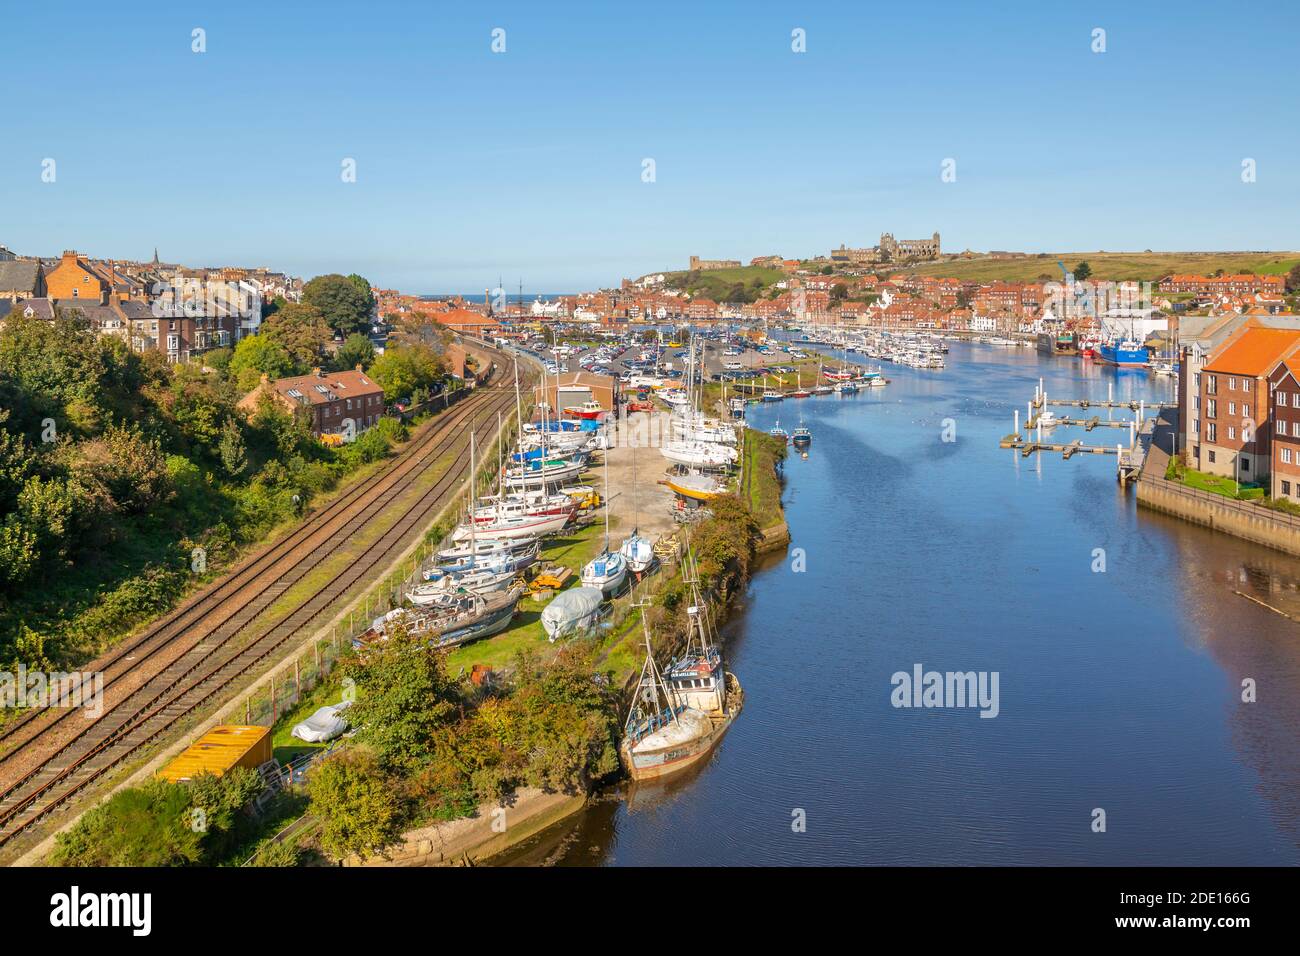 View of Whitby and River Esk from high bridge, North Yorkshire, England, United Kingdom, Europe Stock Photo